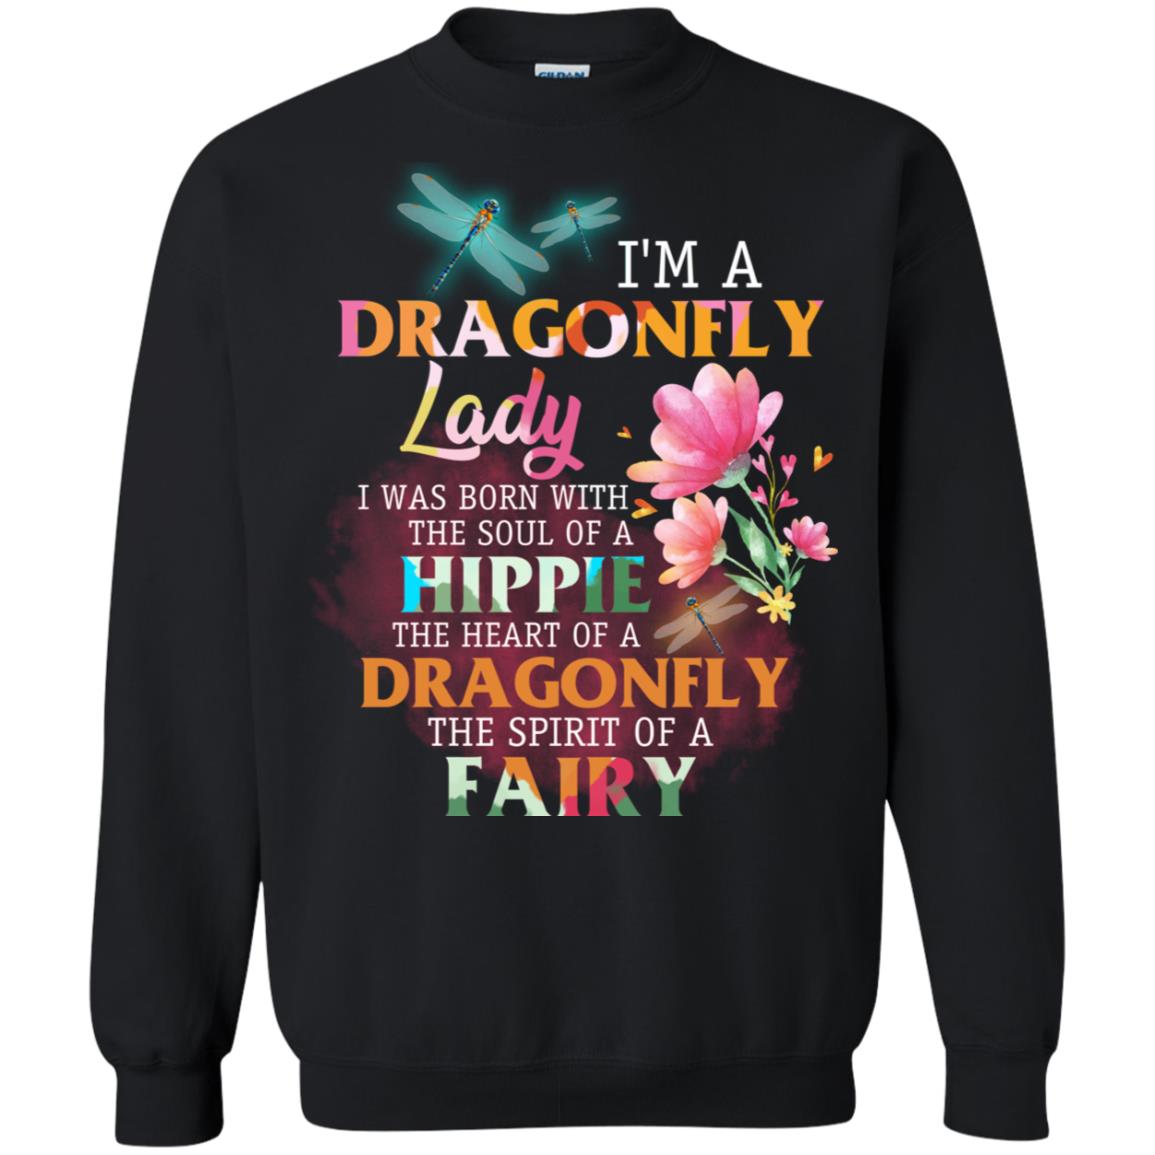 Im A Dragonfly Lady I Was Born With The Soul Of A Hippie The Heart Of A Dragonfly The Spirit Of A FairyG180 Gildan Crewneck Pullover Sweatshirt 8 oz.